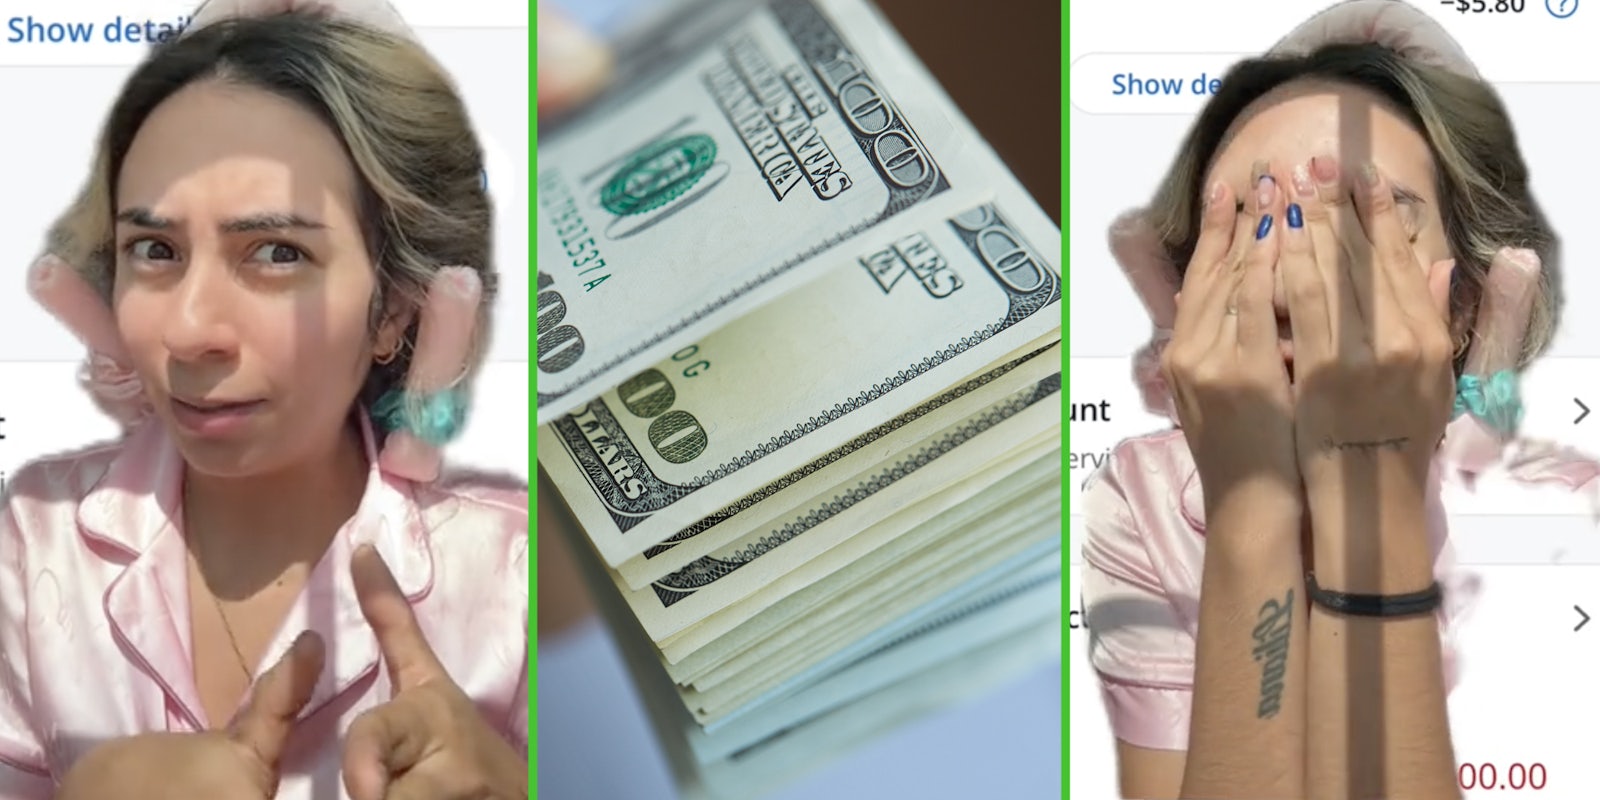 Woman looking shocked(l), Stack of $100 bills(c), Woman with hands over face(r)